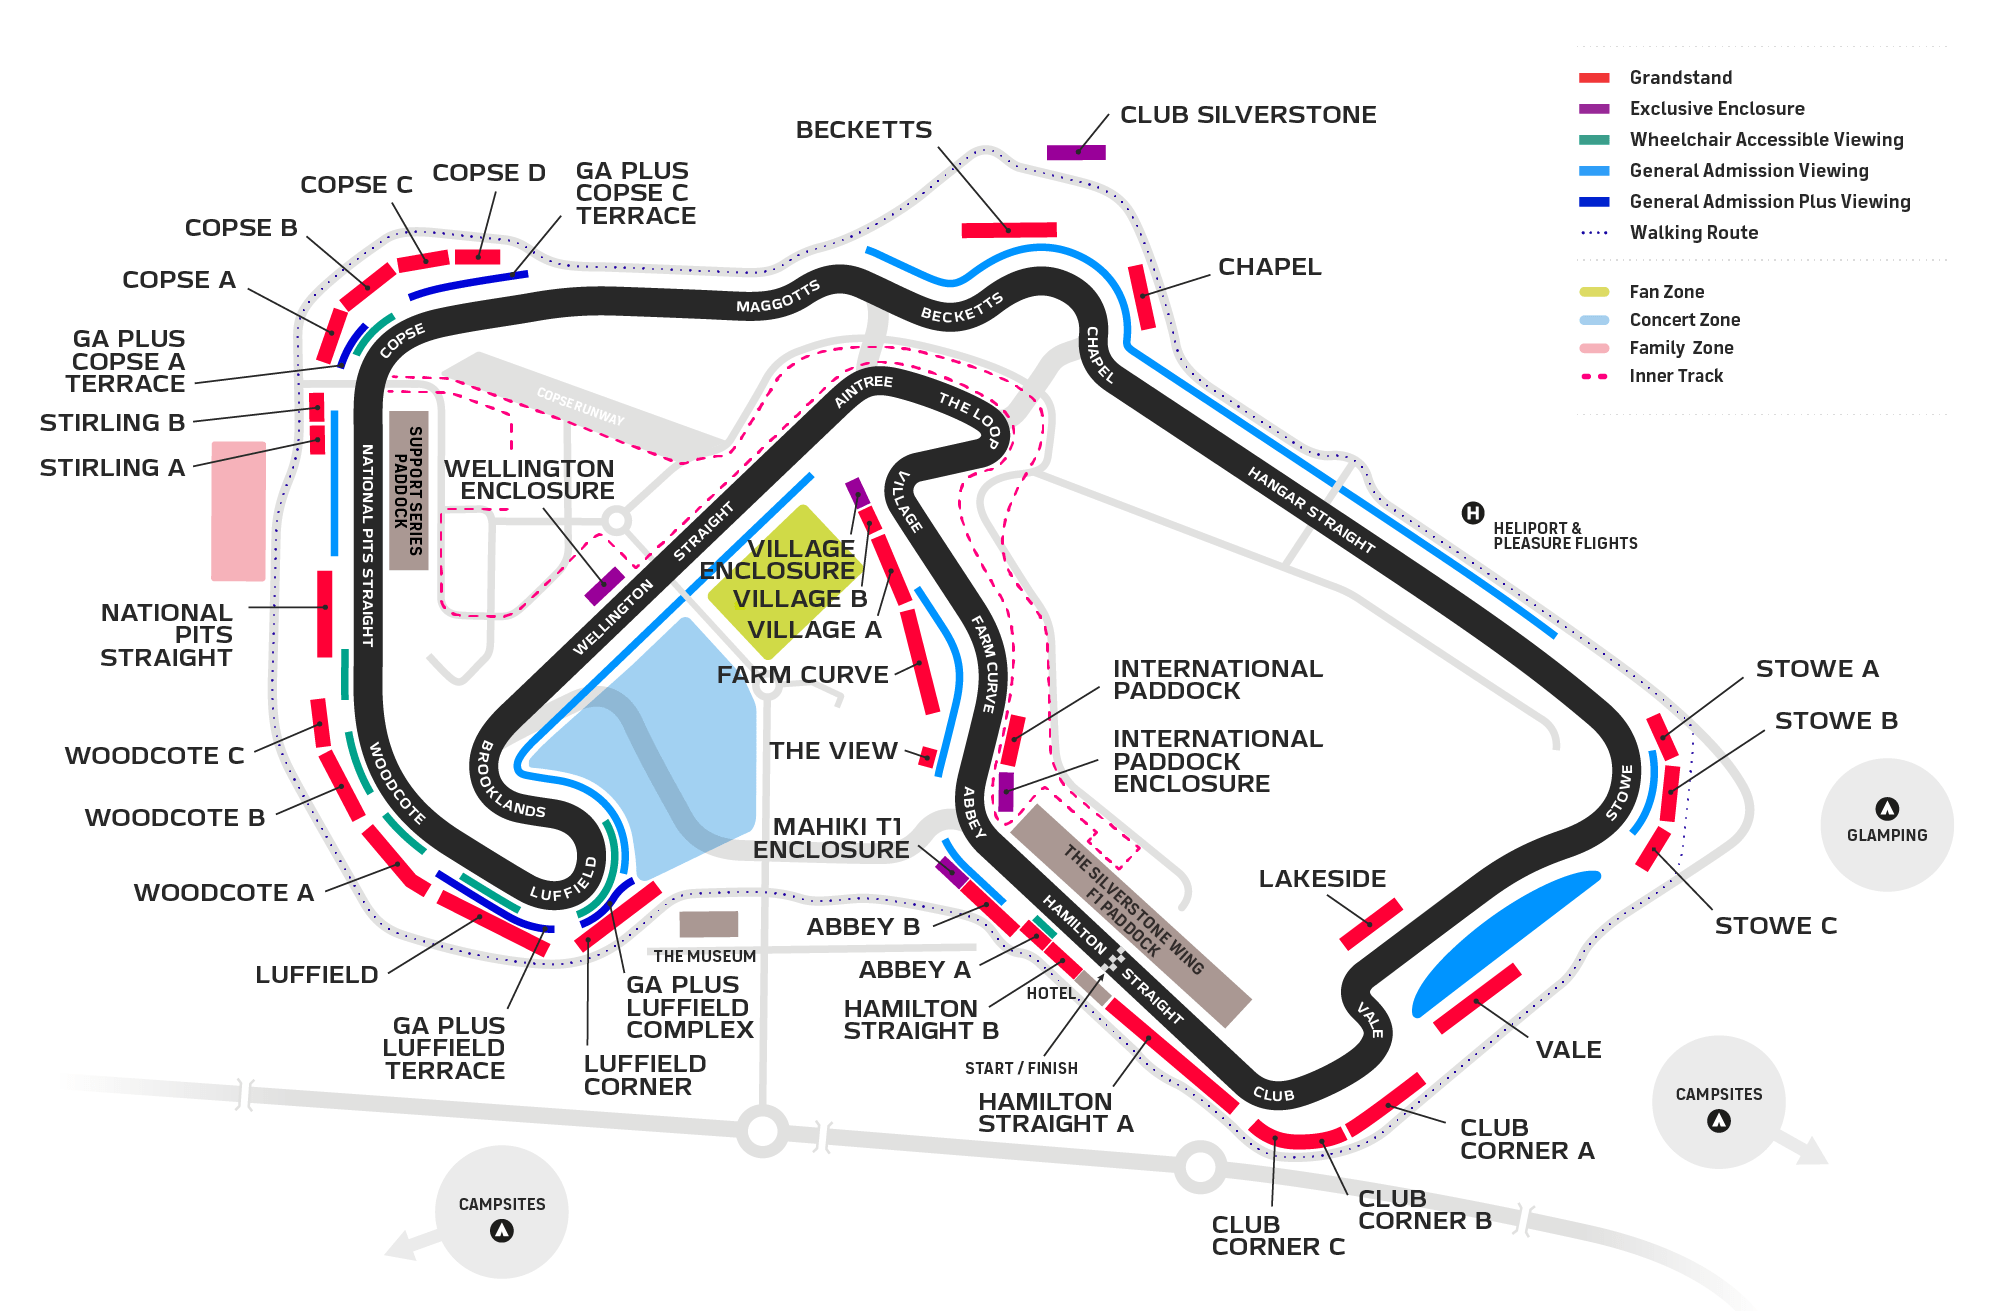 A track map for the Silverstone circuit showing each corner and stands.